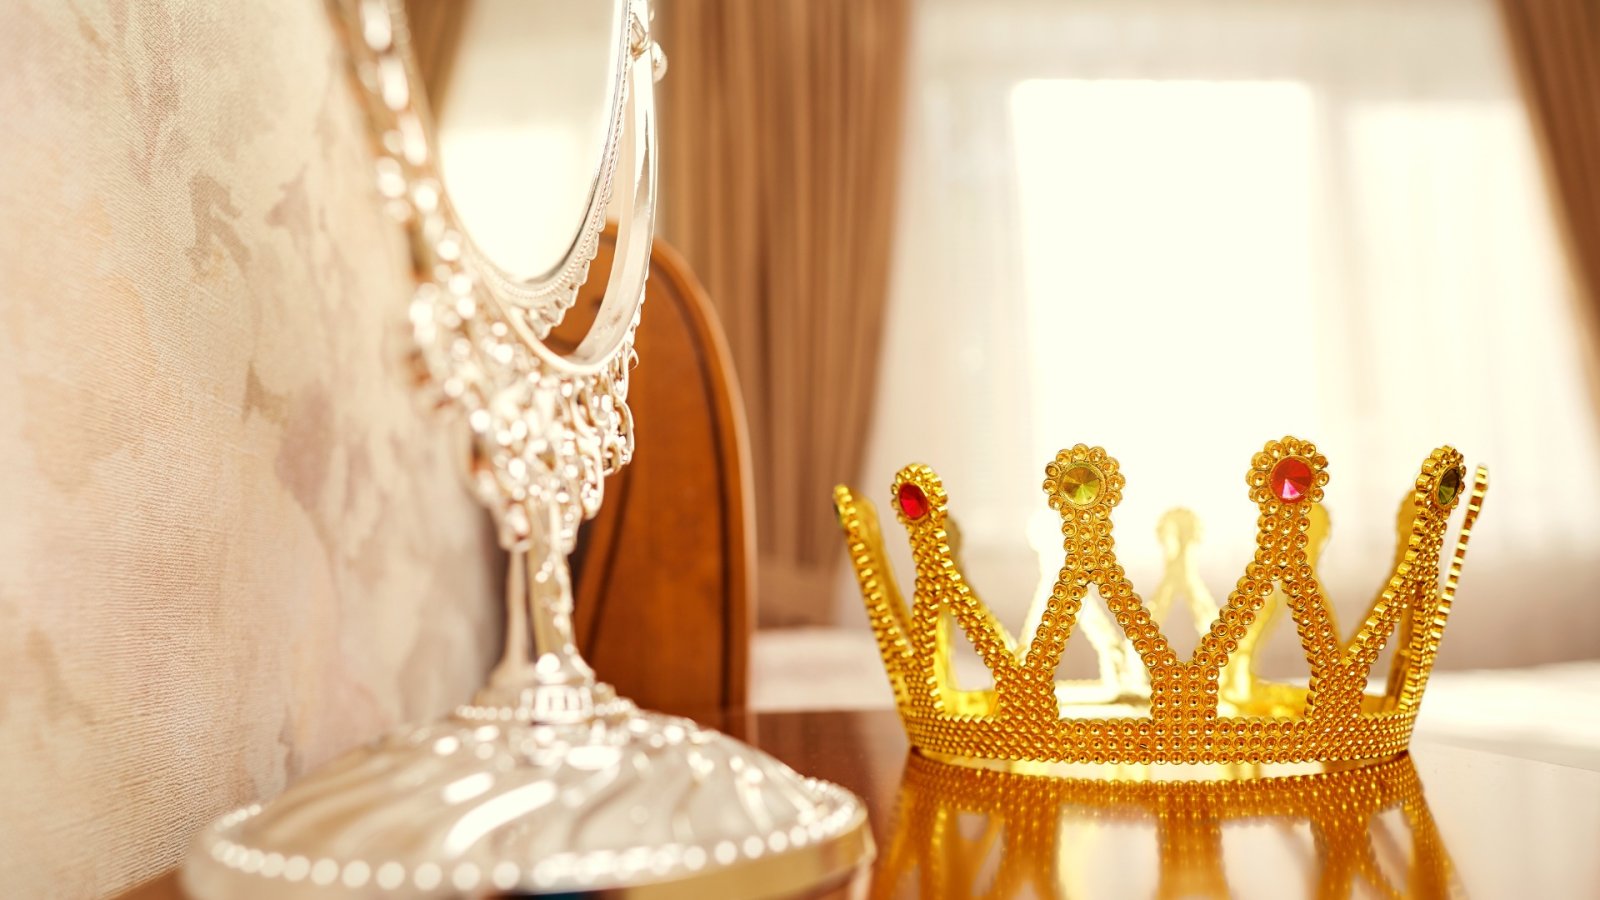 How to Become Royalty: luxury items from the Netflix series Crown are up for auction